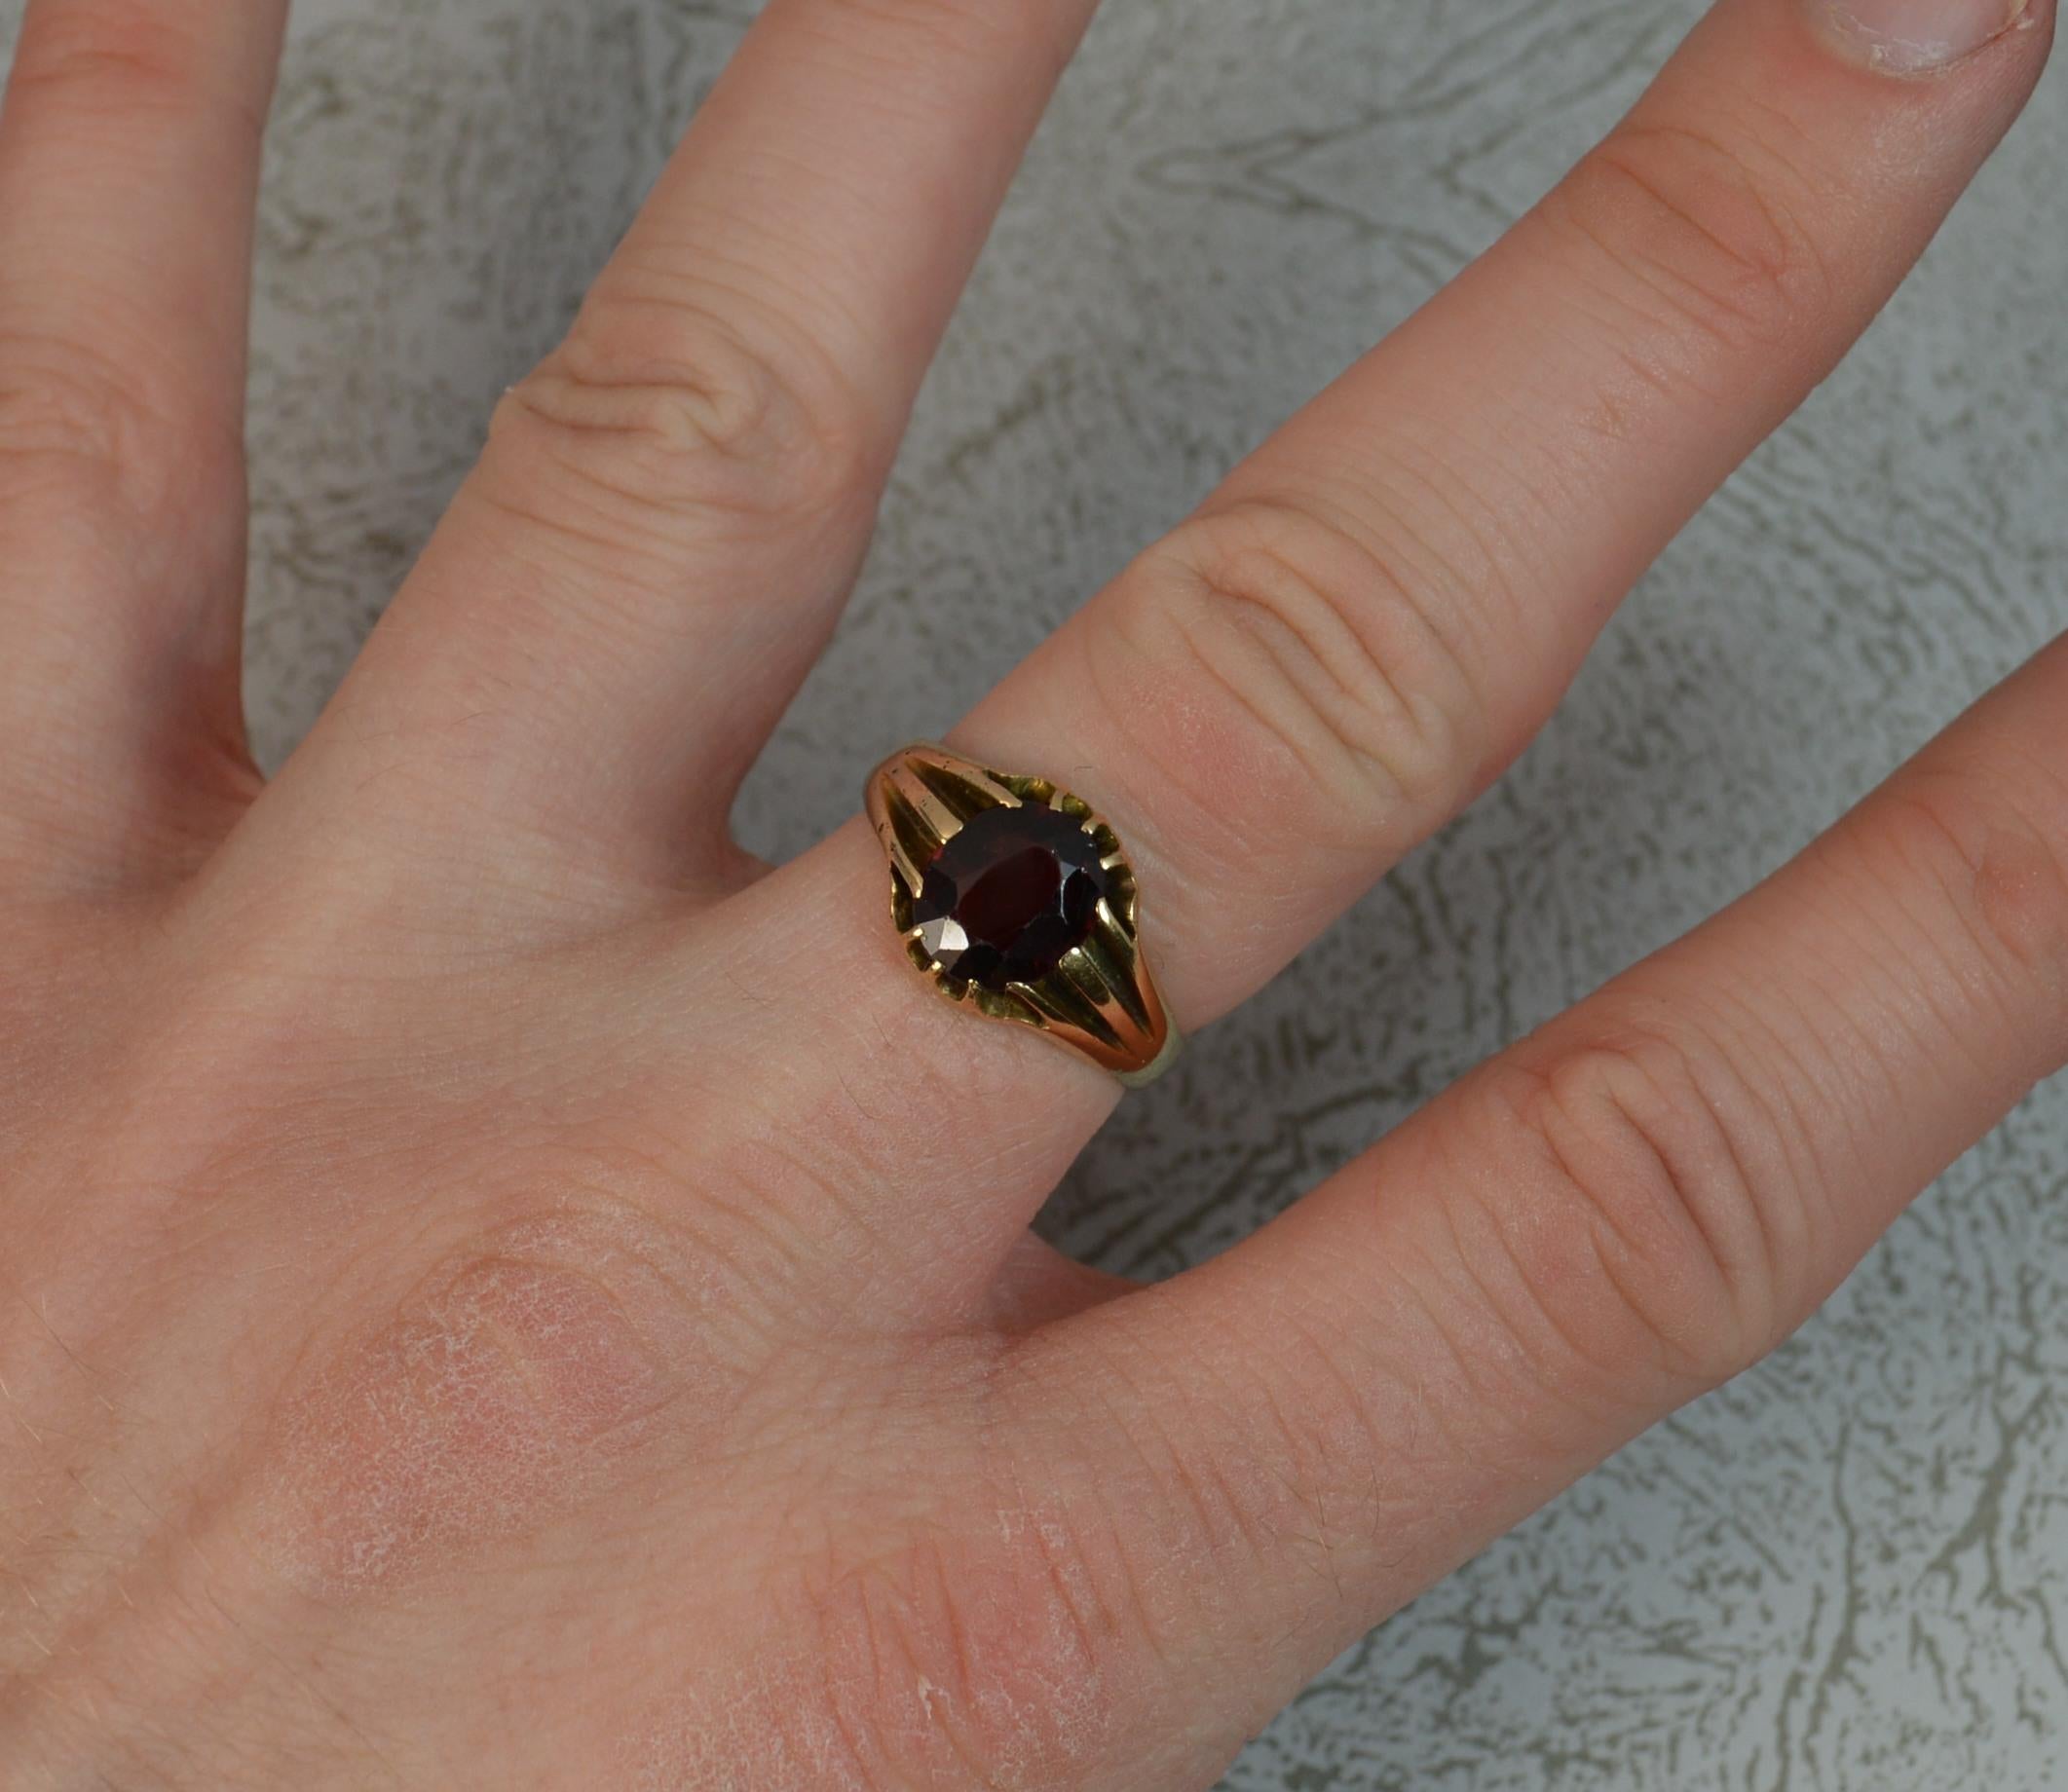 A superb late Victorian unisex gypsy solitaire ring.
Solid 18 carat yellow gold shank.
Set with a single oval cut garnet in claw setting. 7.6mm x 9mm.
CONDITION ; Very good. Well set garnet, light surface wear. Small pitting marks to shoulders. 